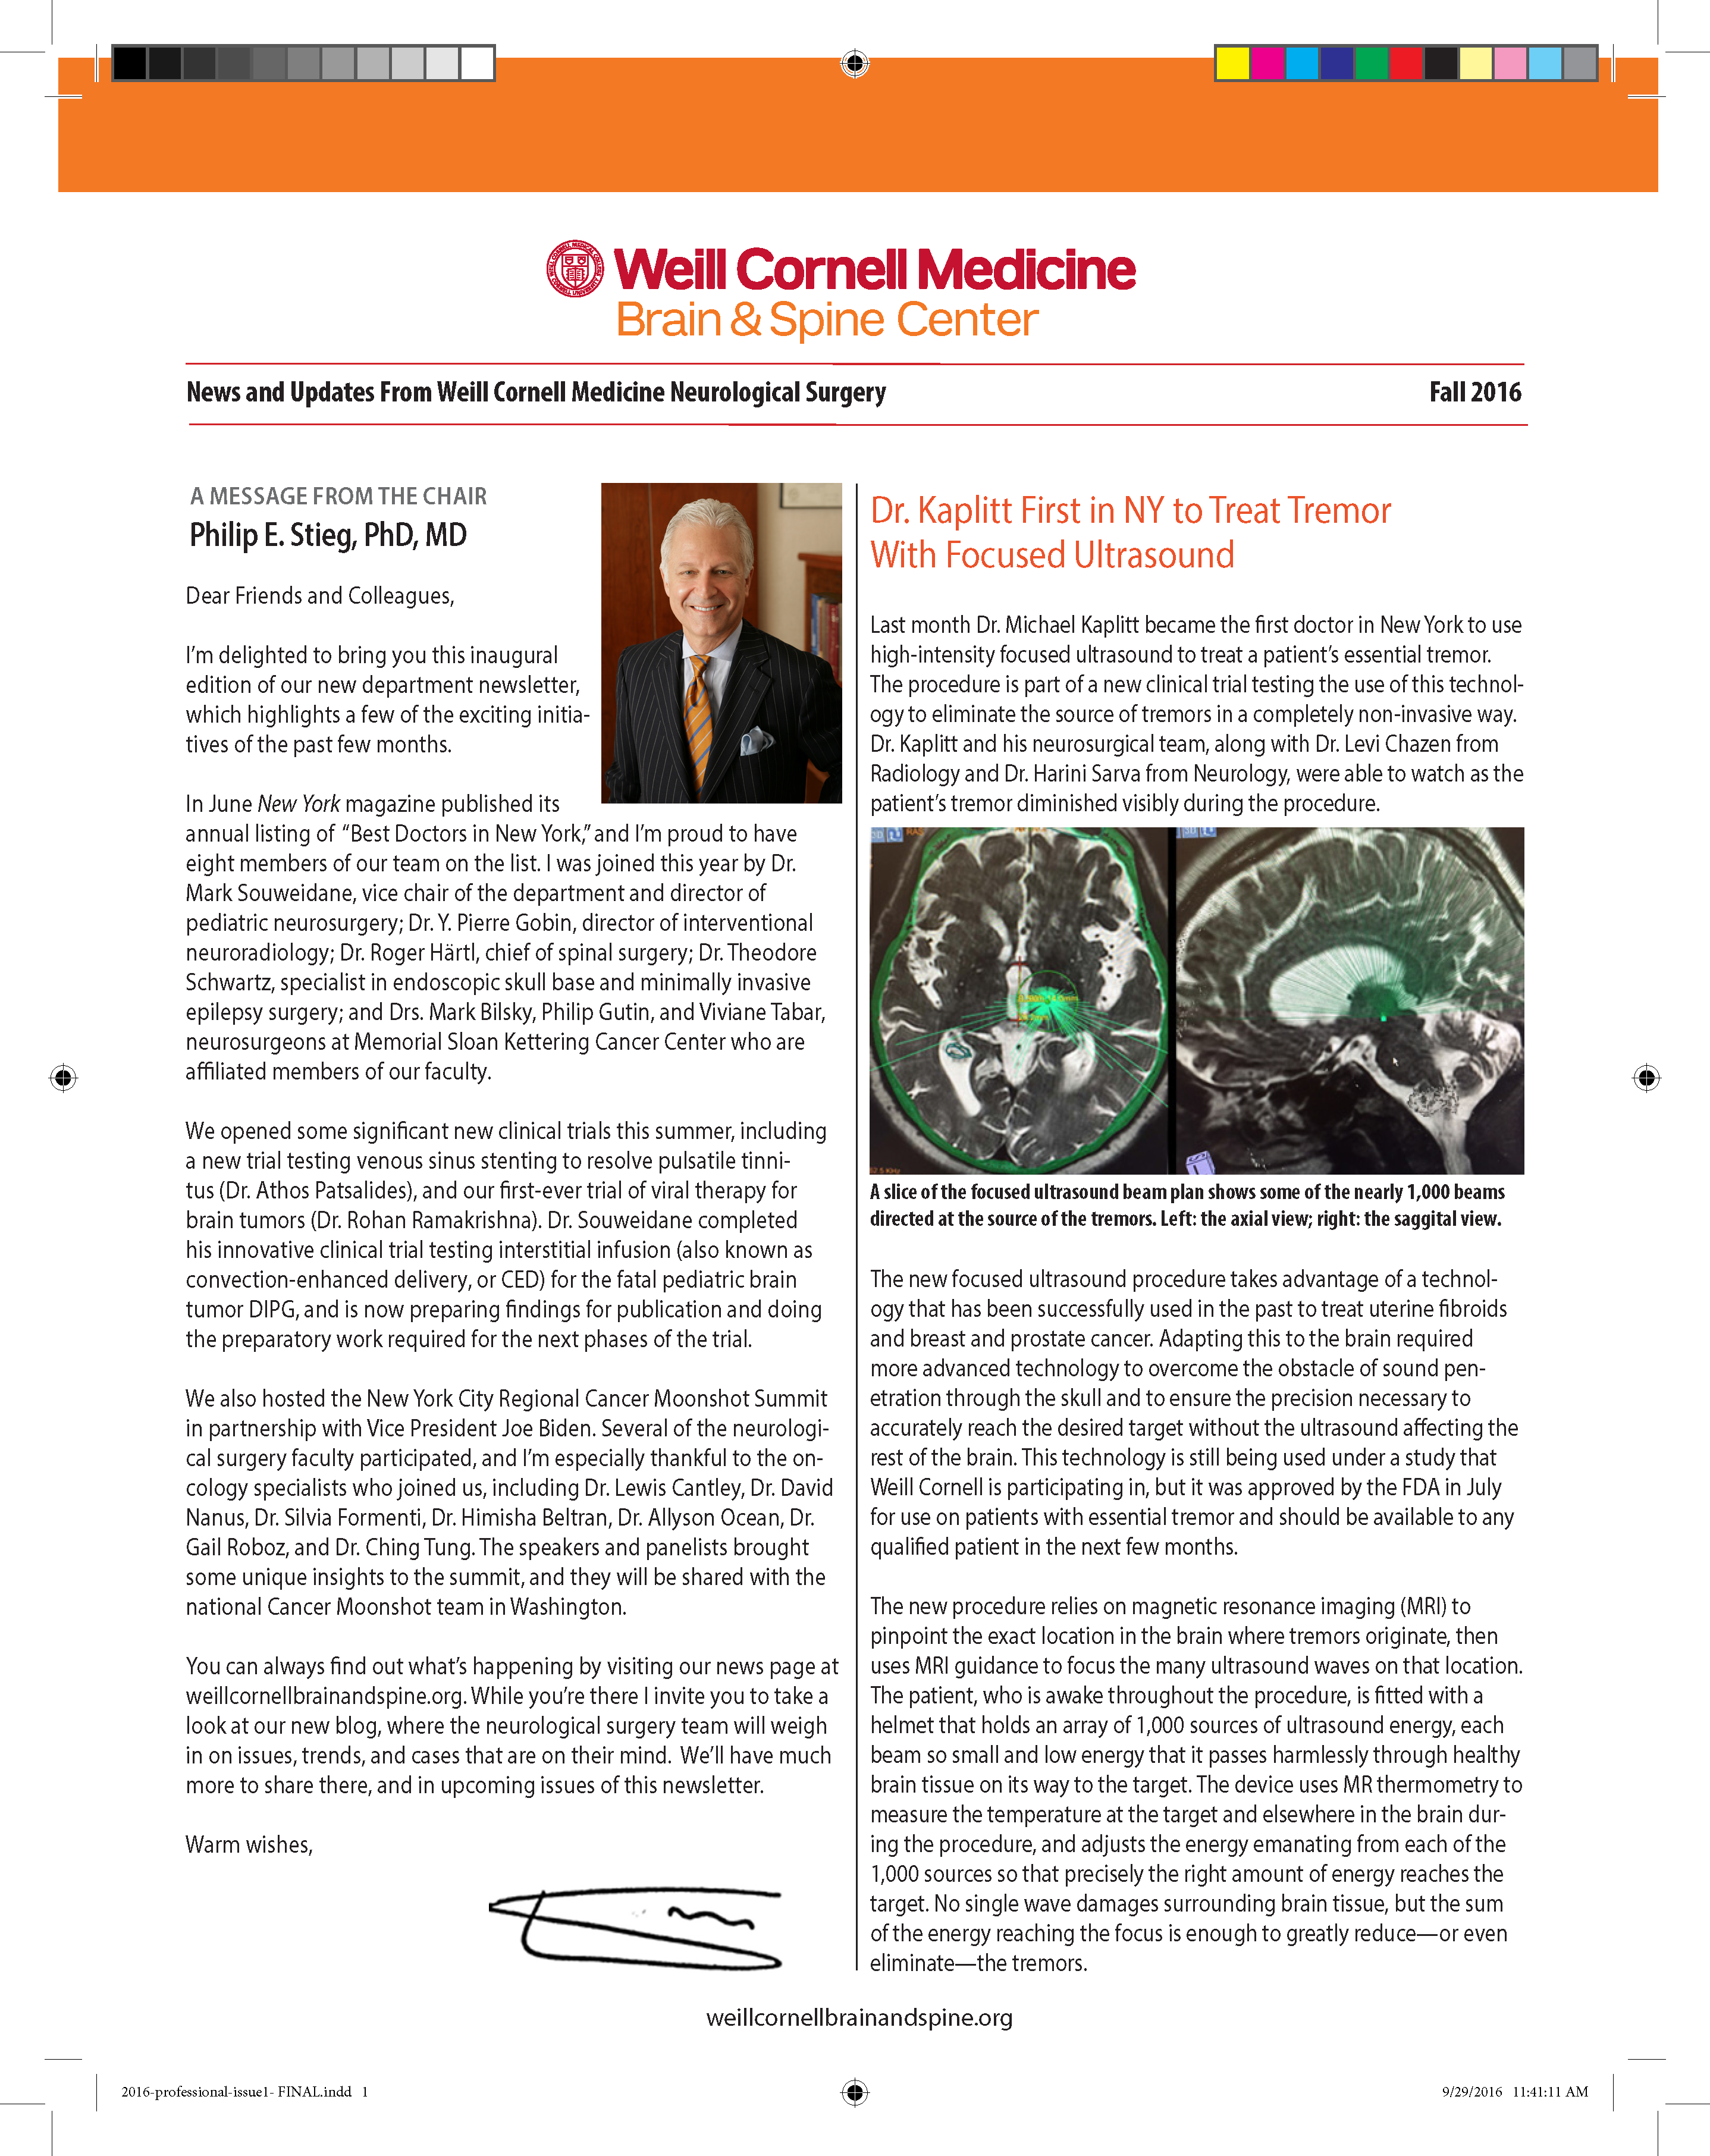 WCM Brain and Spine Center Newsletter - Fall 2016